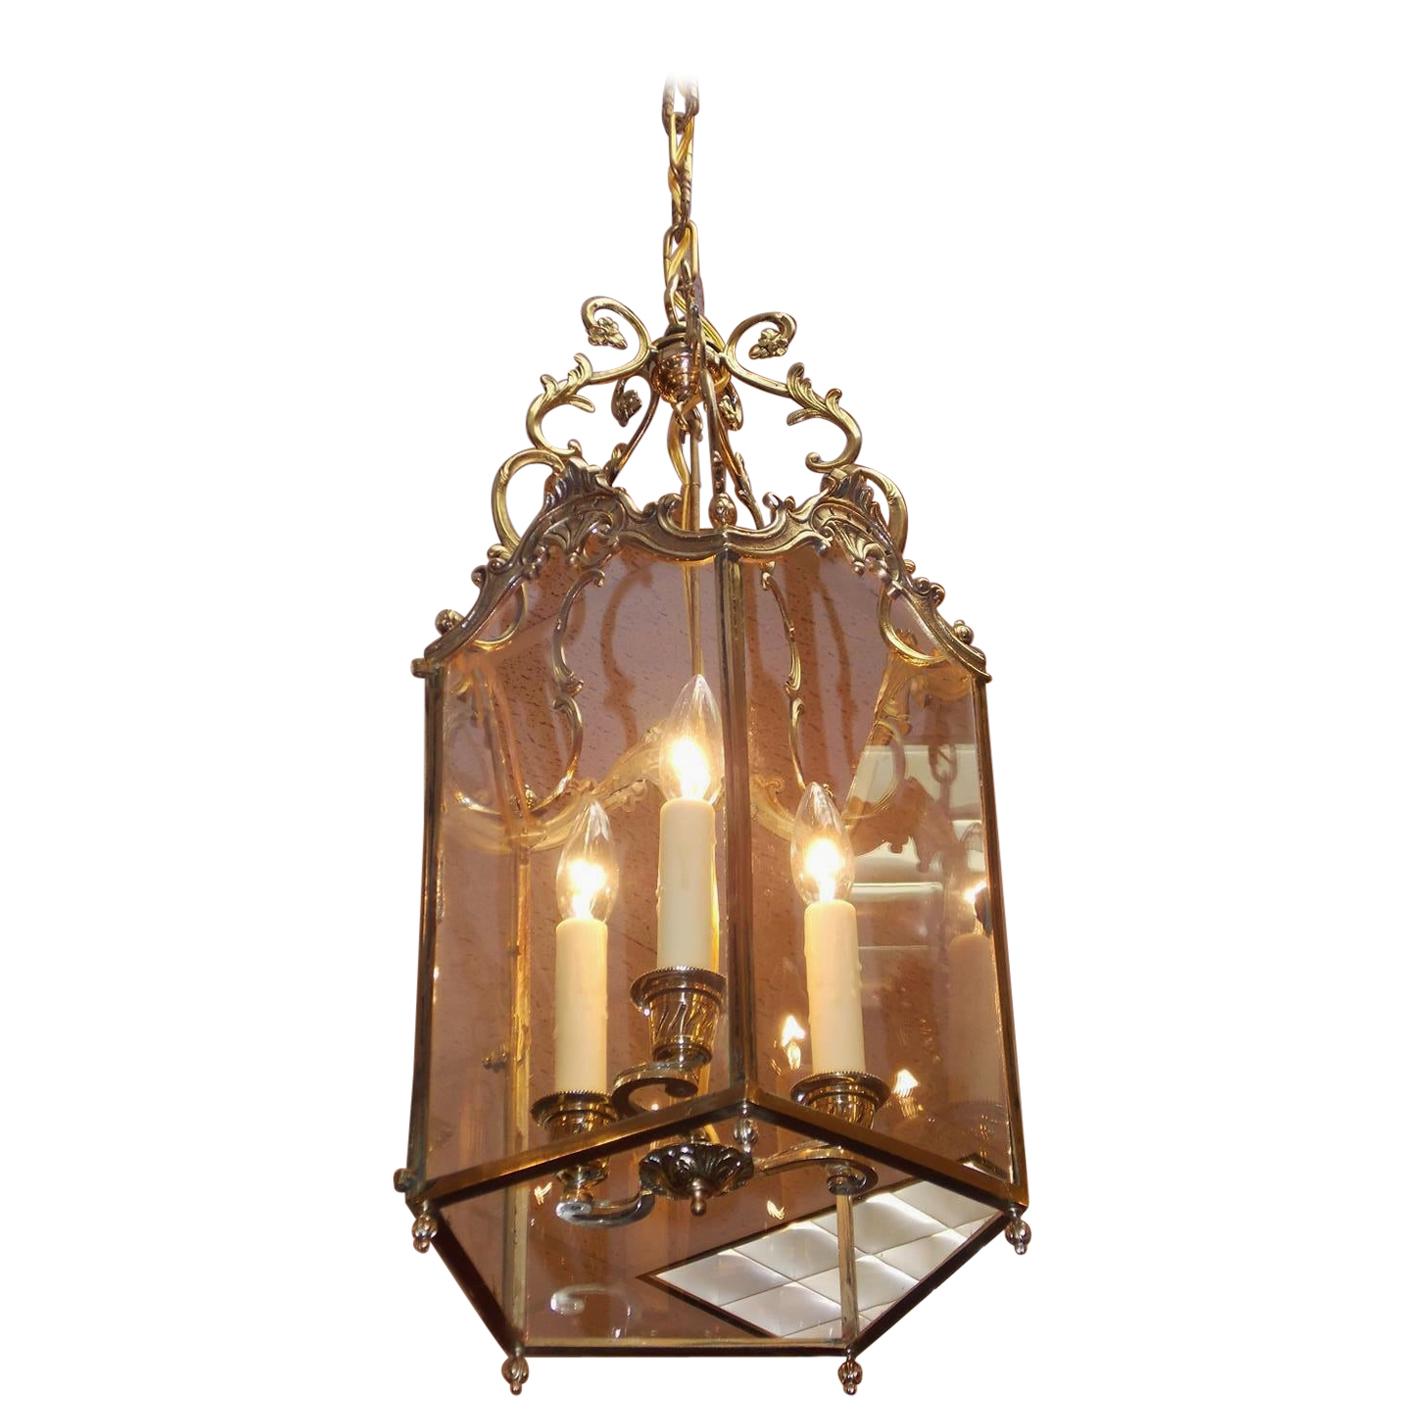 English Brass Floral Hanging Hall Glass Lantern with Interior Cluster, C. 1820